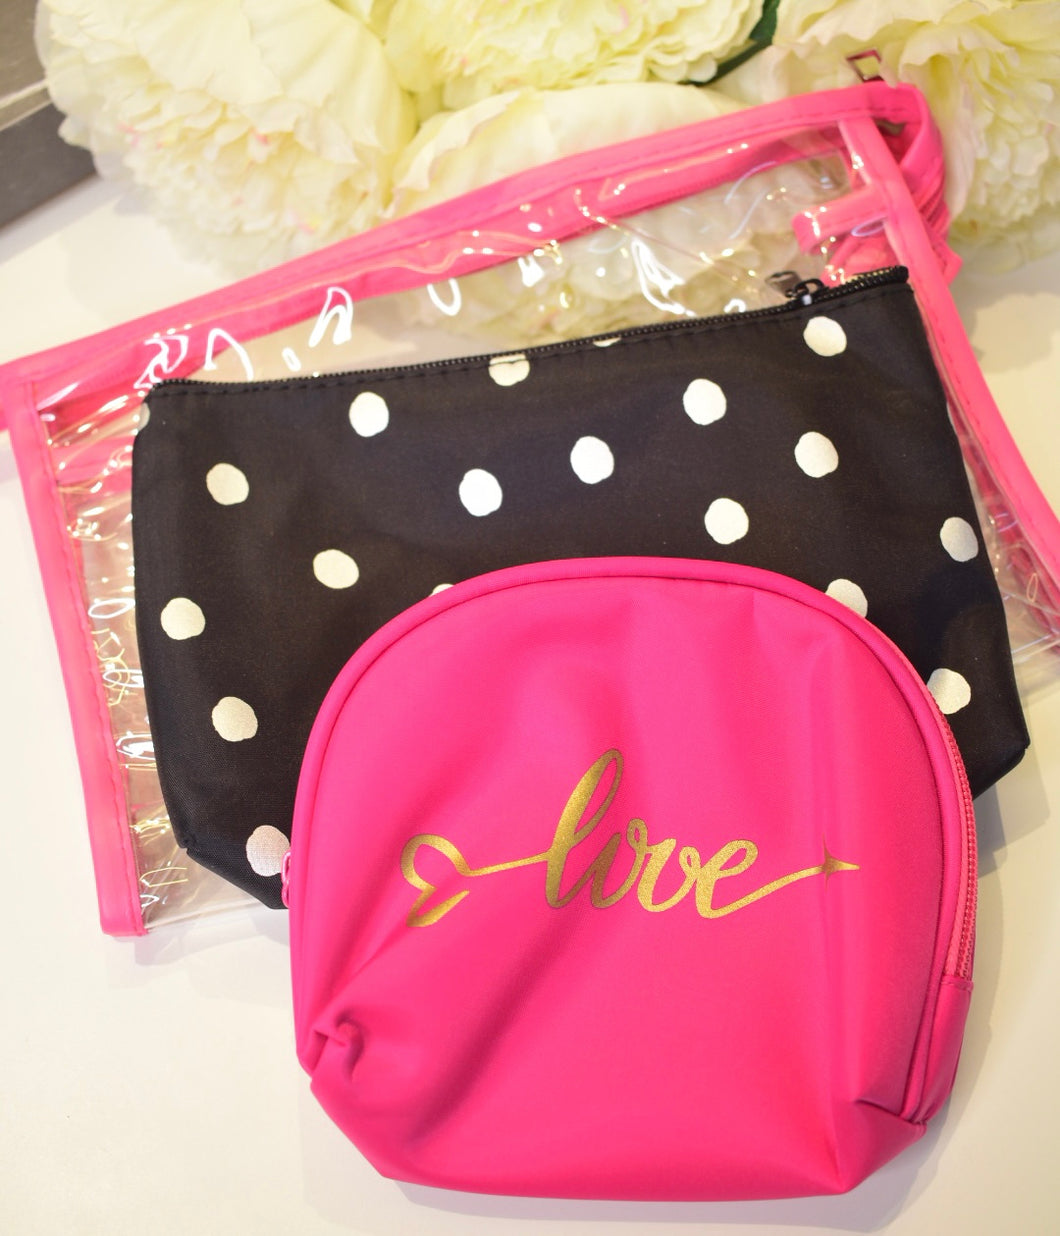 3 in 1 Love Polka Dot Makeup Pouch Set